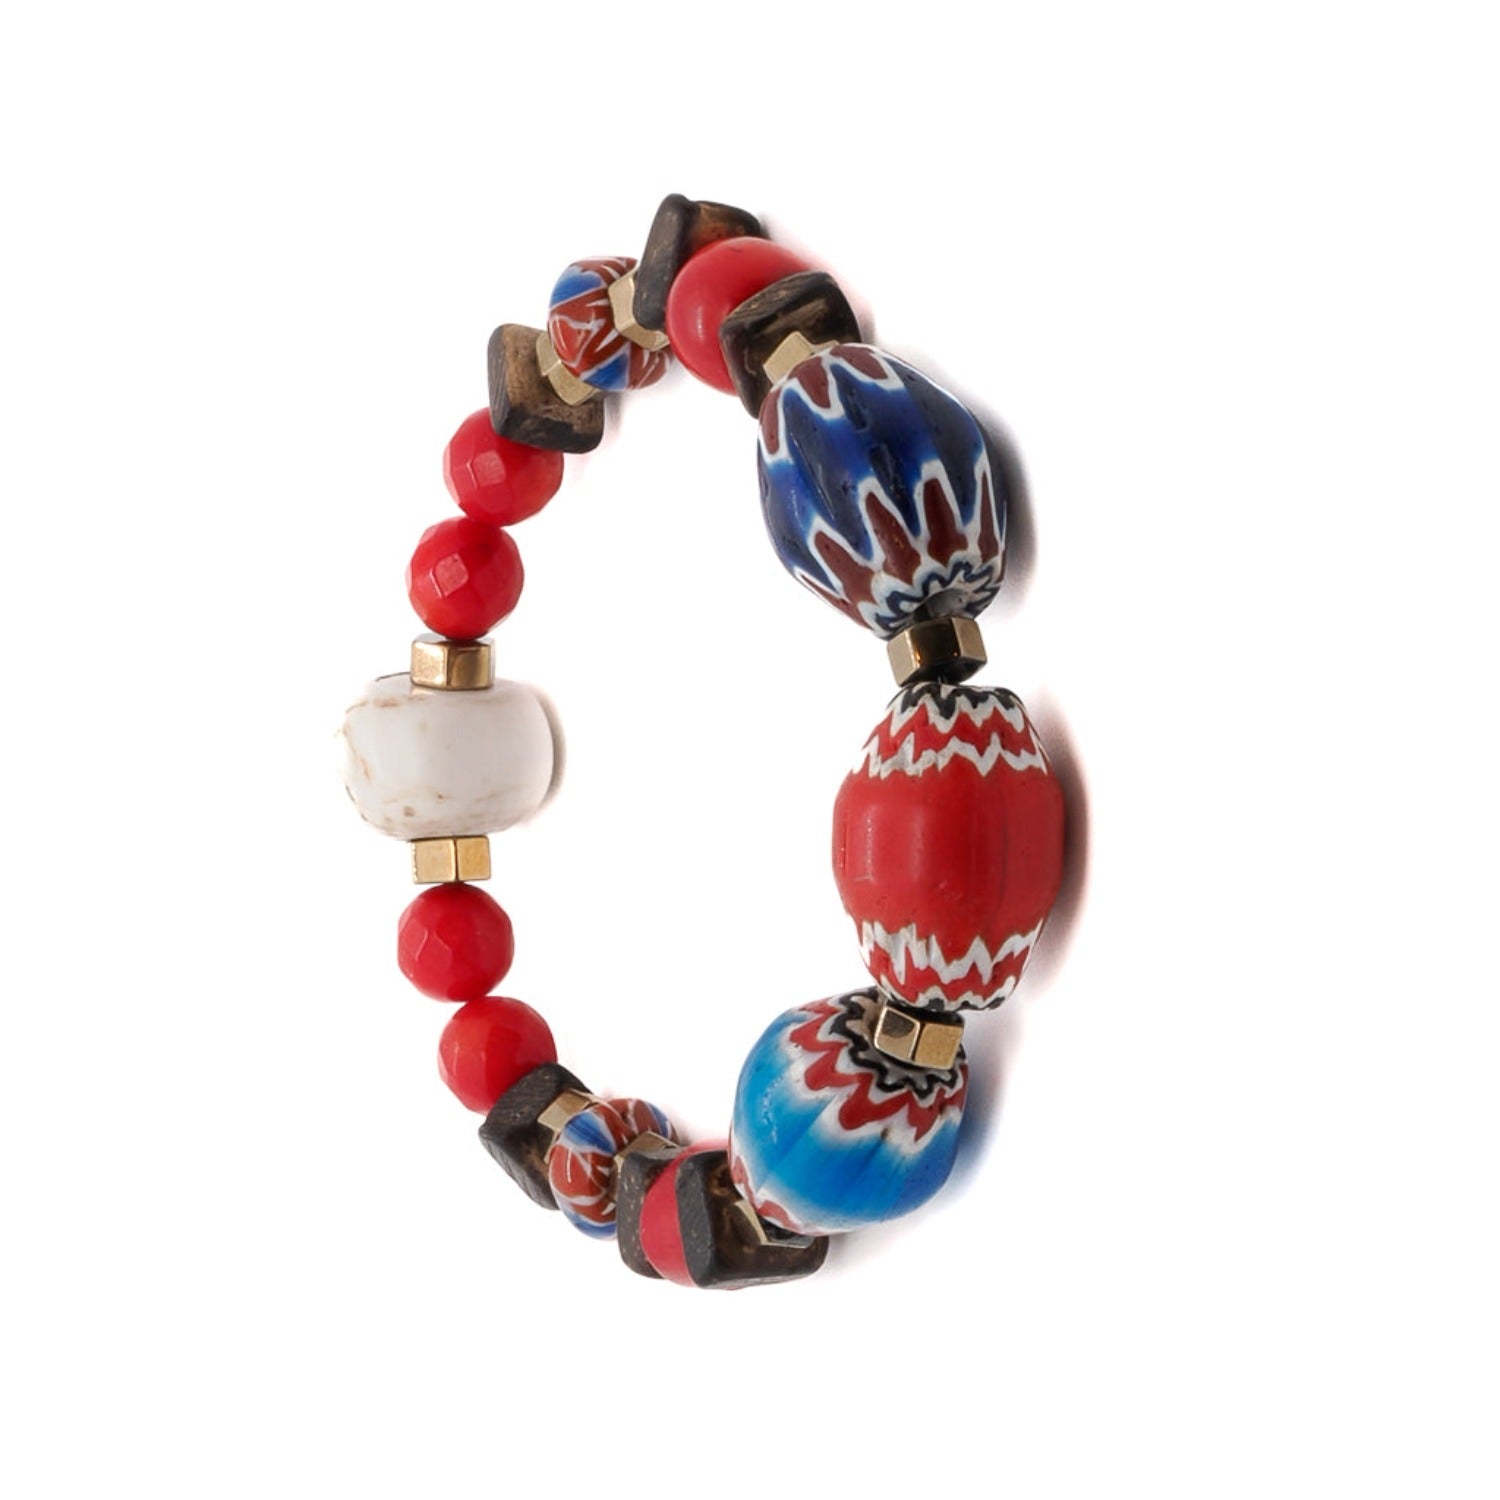 Let the Palena Bracelet make a statement with its unique combination of African beads and a Nepal white bone bead.